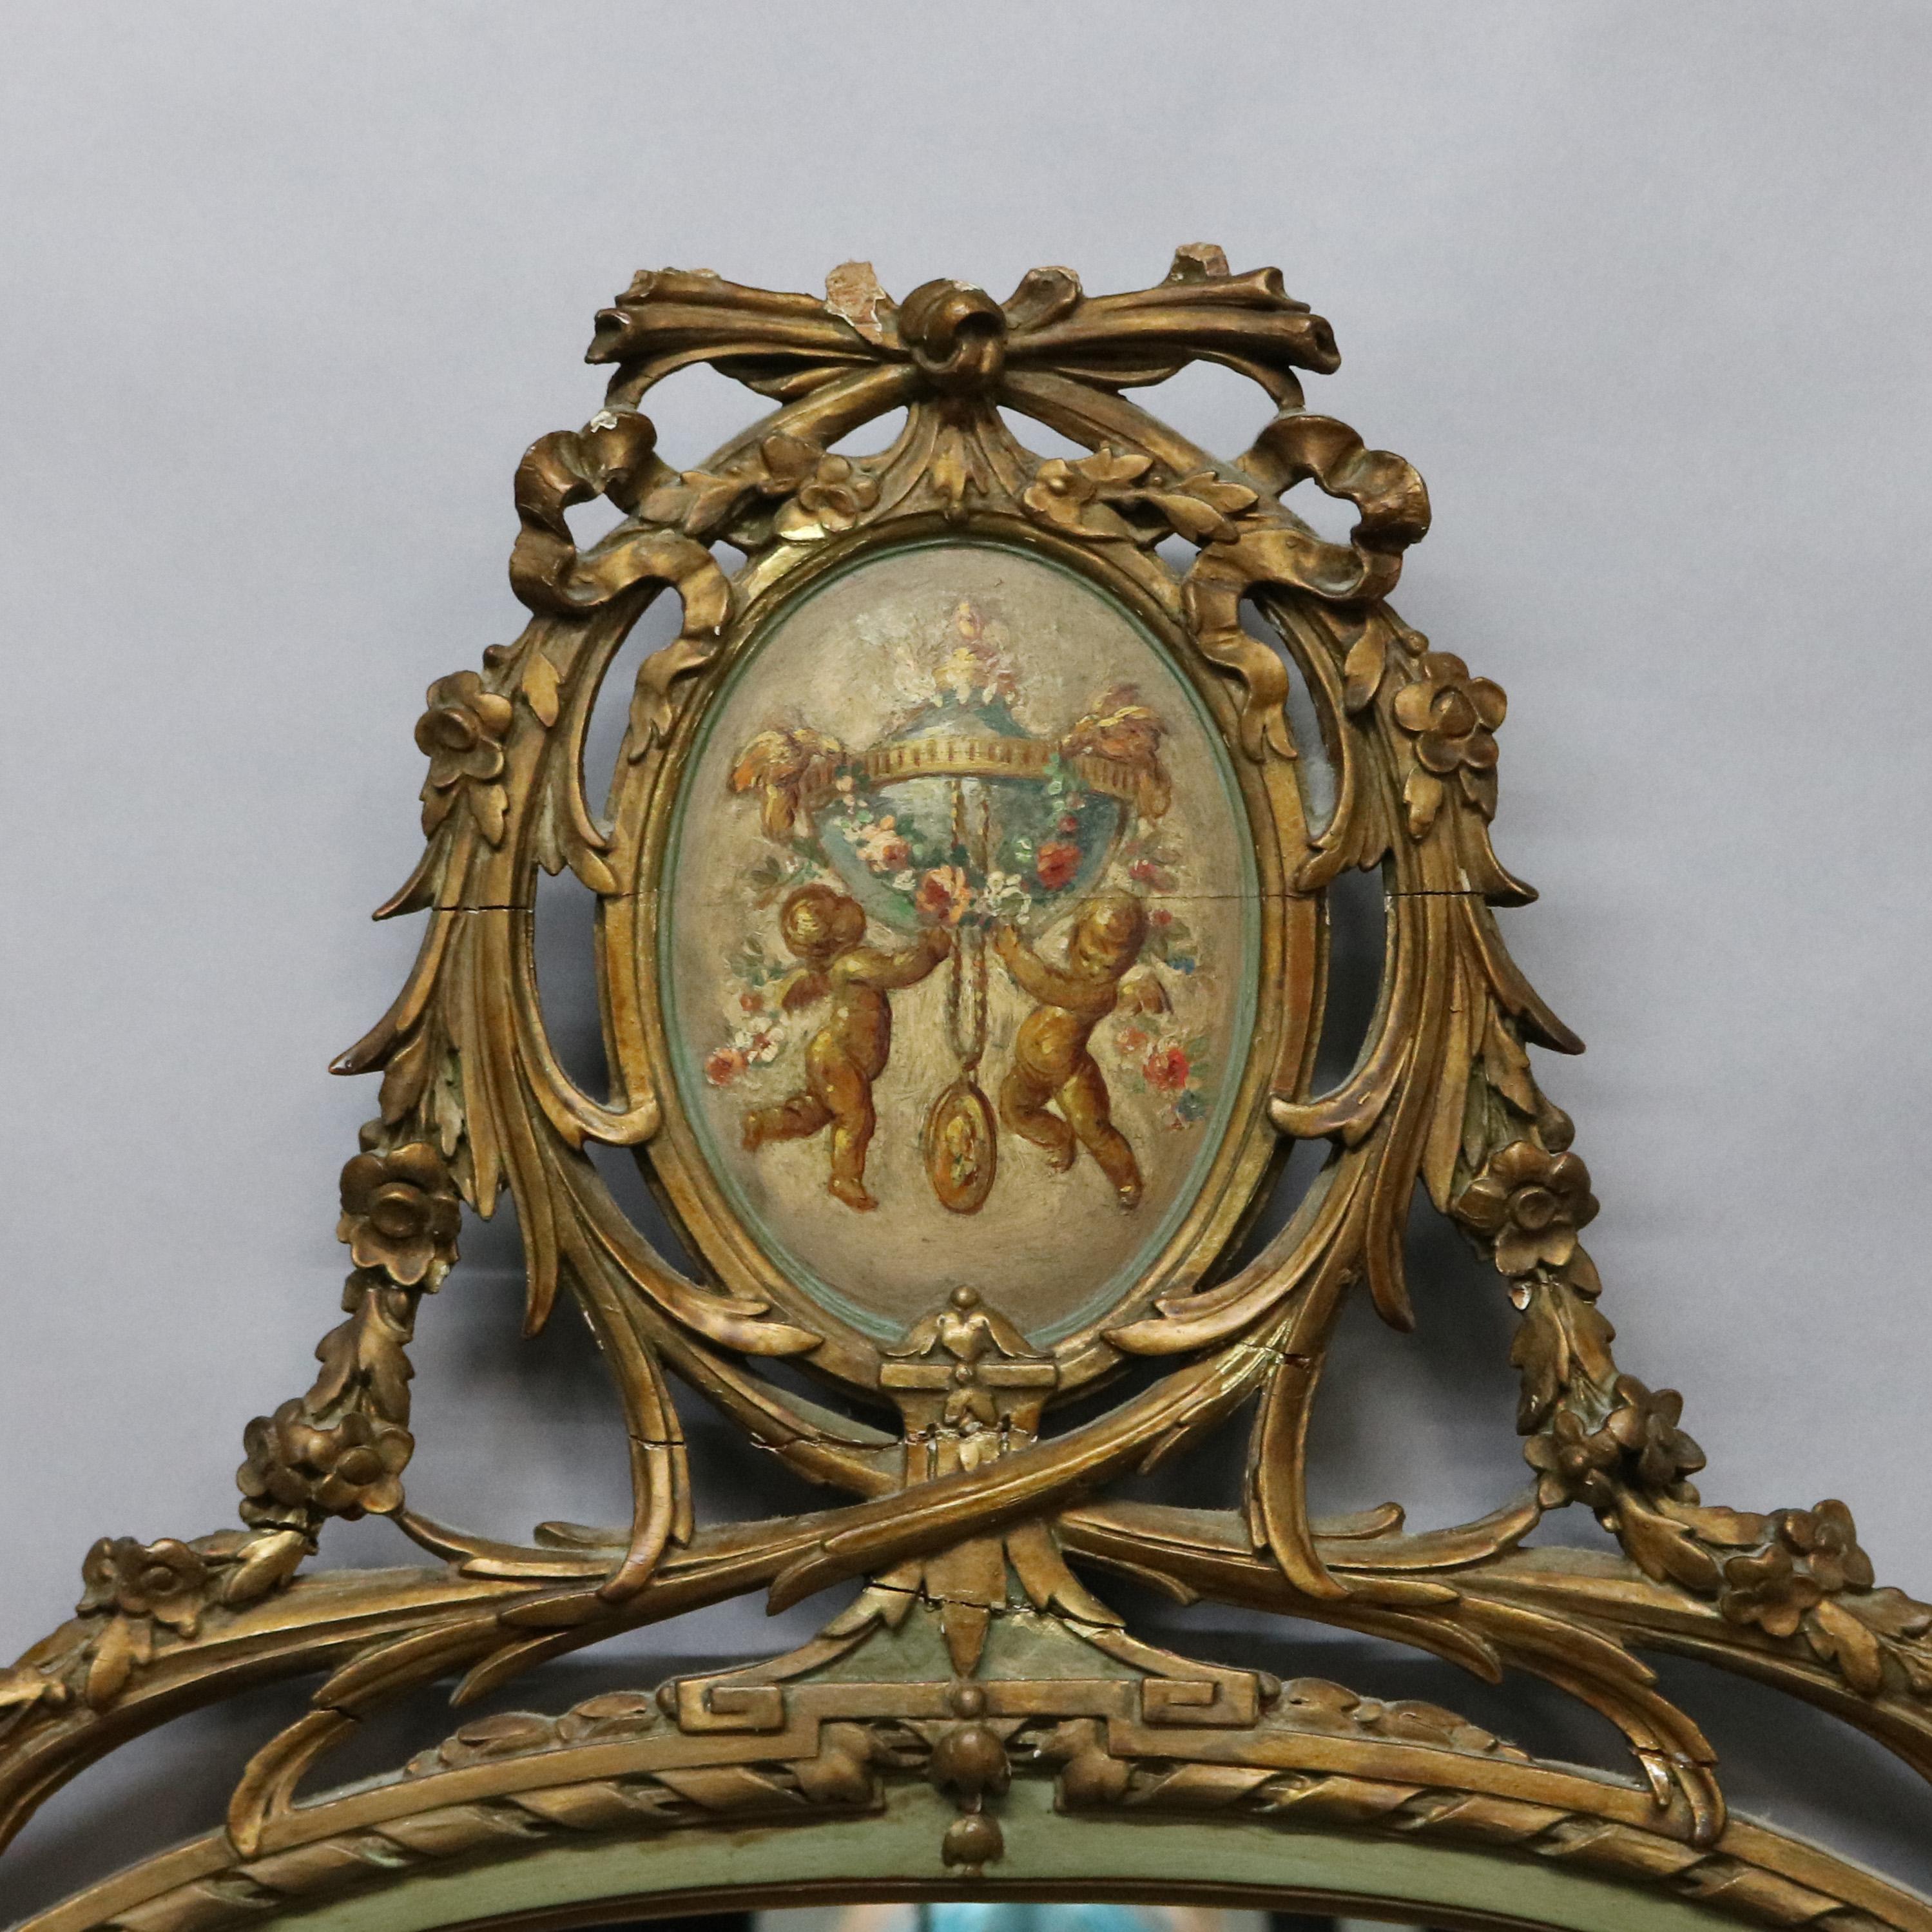 An antique French style wall mirror offers giltwood frame with foliate reticulated crest having central Adam decorated medallion having Classical cherub scene and twisted ribbon trim, mirror has etched panels with rosettes, c1920.

Measures: